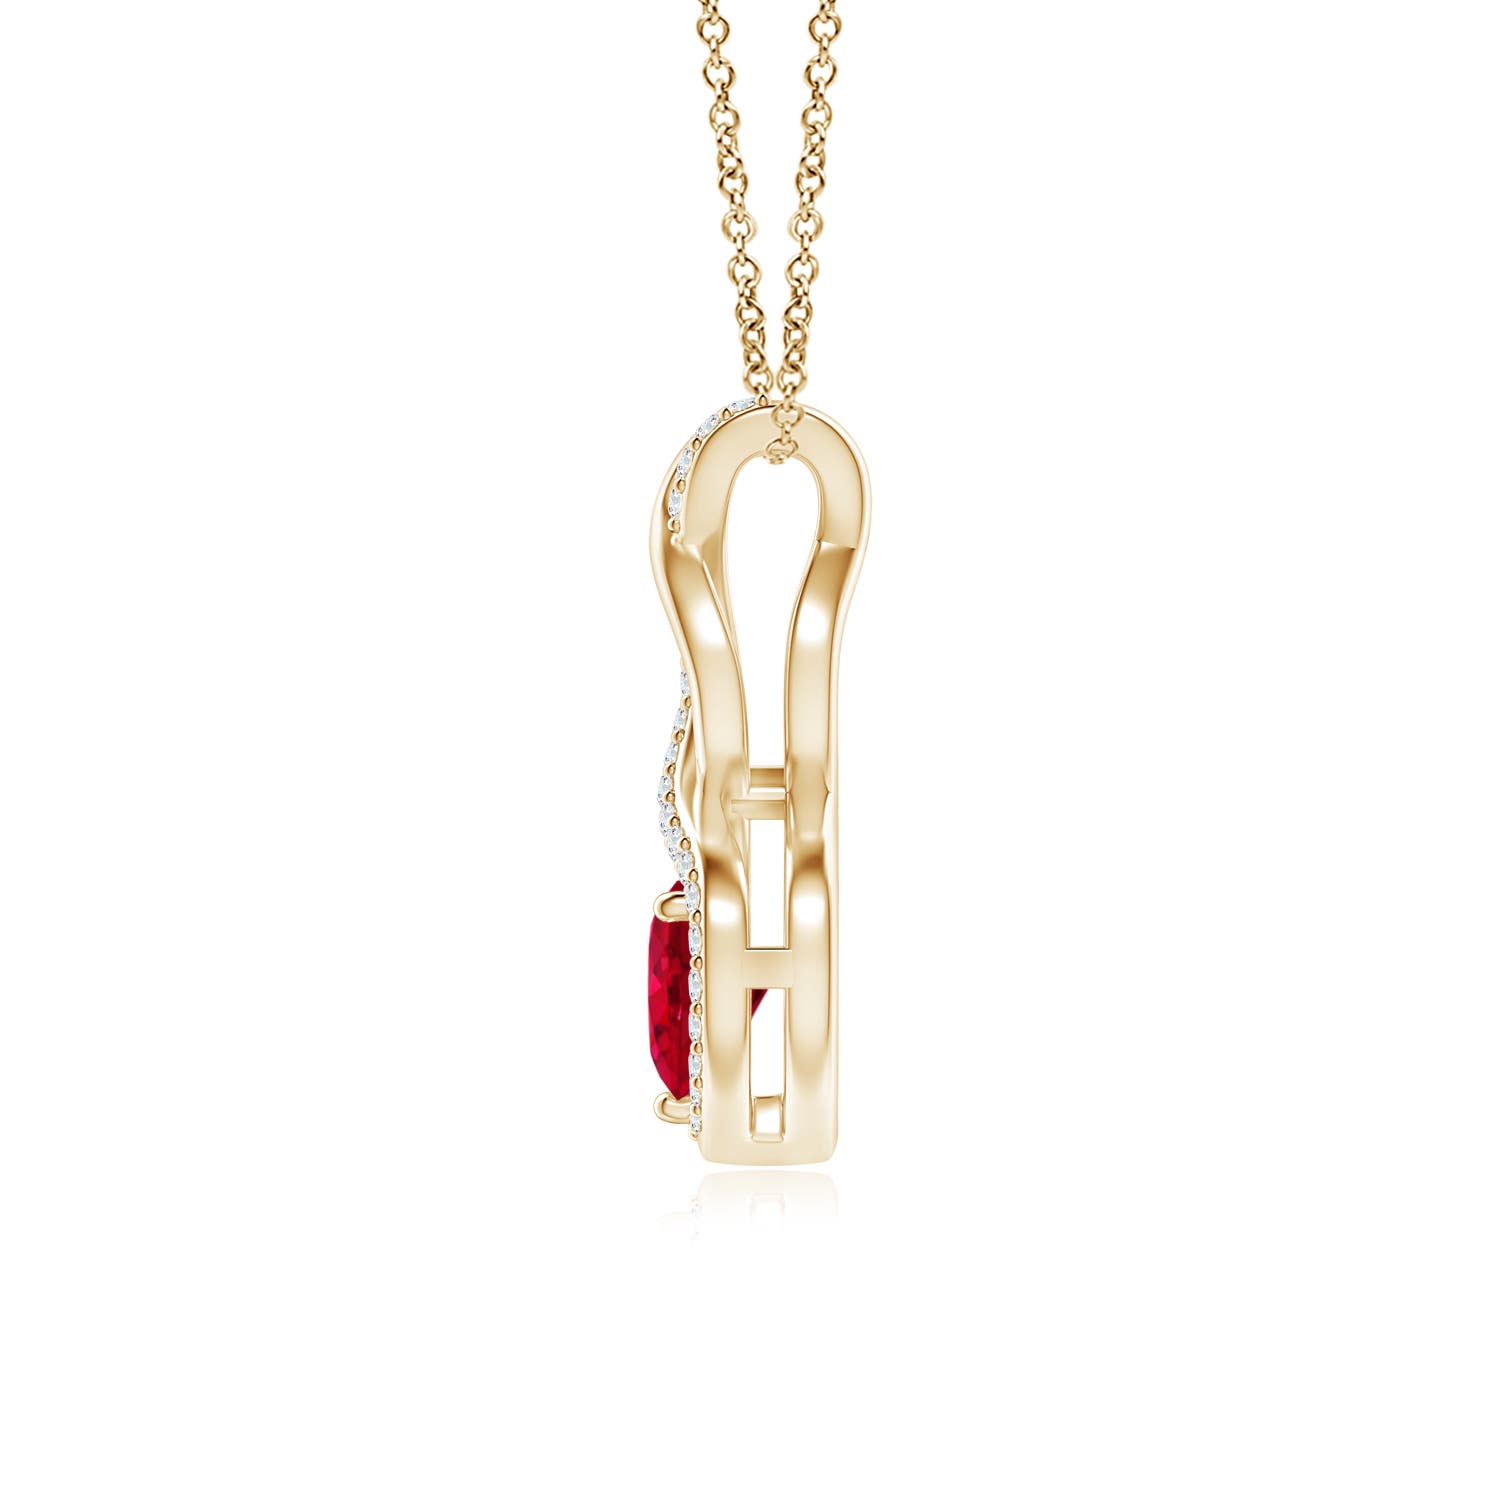 AAA - Ruby / 0.61 CT / 14 KT Yellow Gold